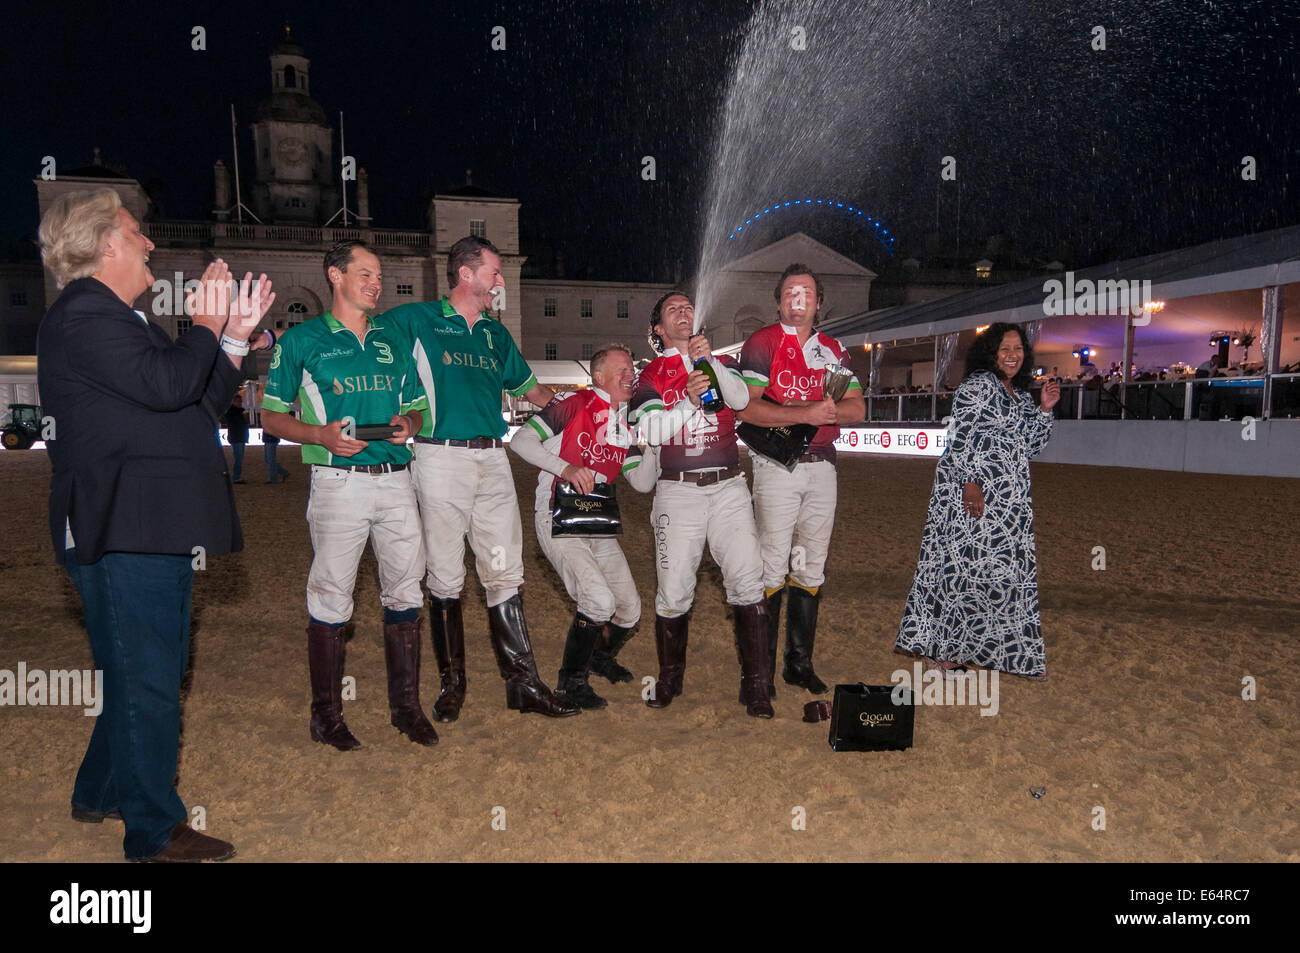 London, UK, 14 August 2014.  The famous Horse Guards Parade hosts City Polo, an inaugural evening of international arena polo.  Pictured : Team Wales celebrate with champagne after receiving their winner's trophy from designer, David Emanuel.   Credit:  Stephen Chung/Alamy Live News Stock Photo